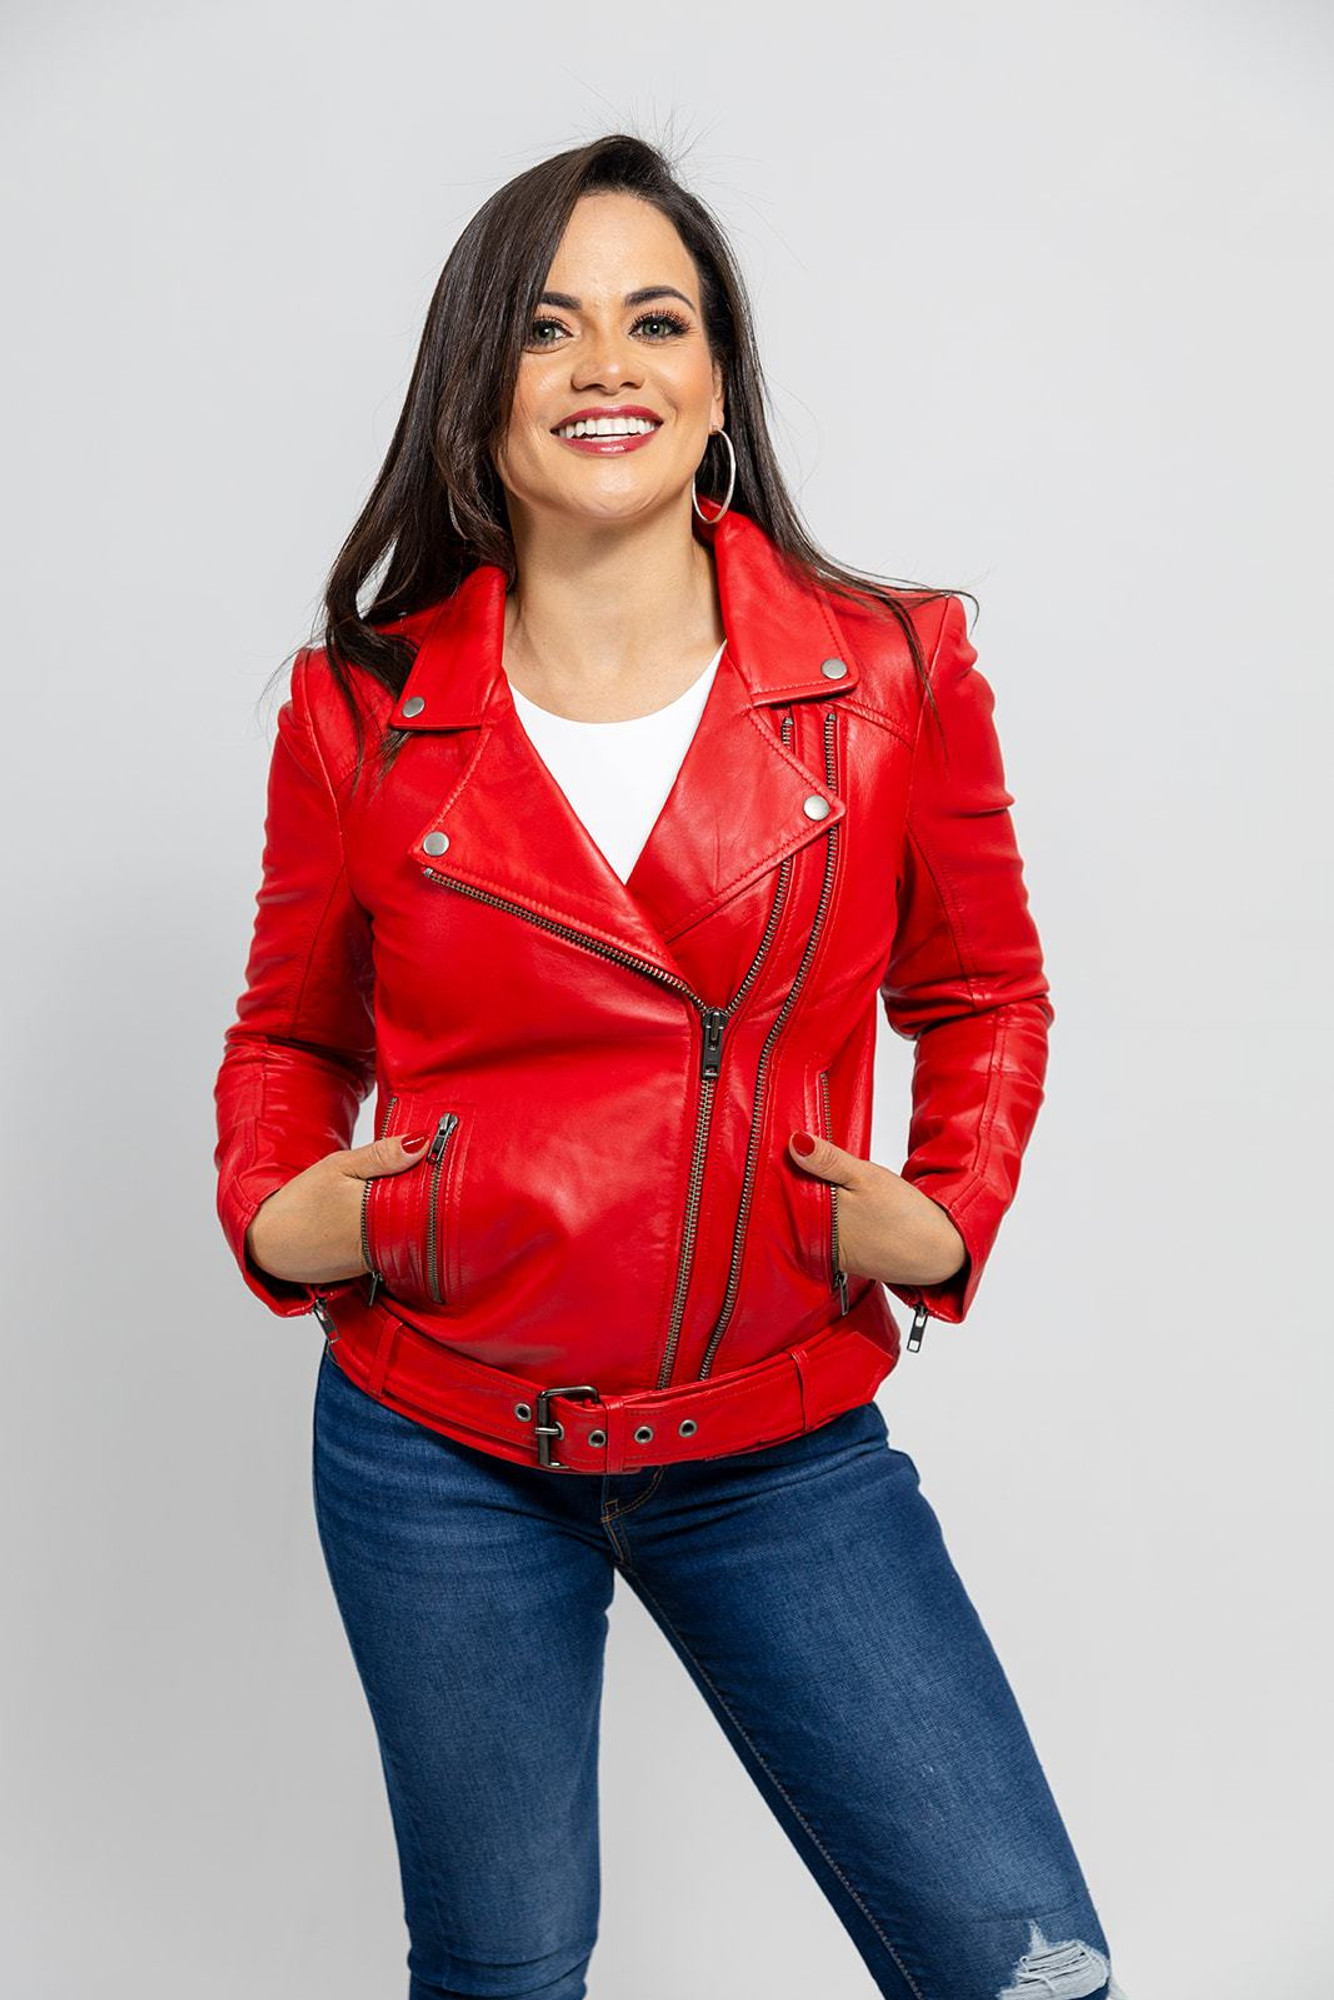 Tanners Avenue Red Leather Bomber Jacket - Women